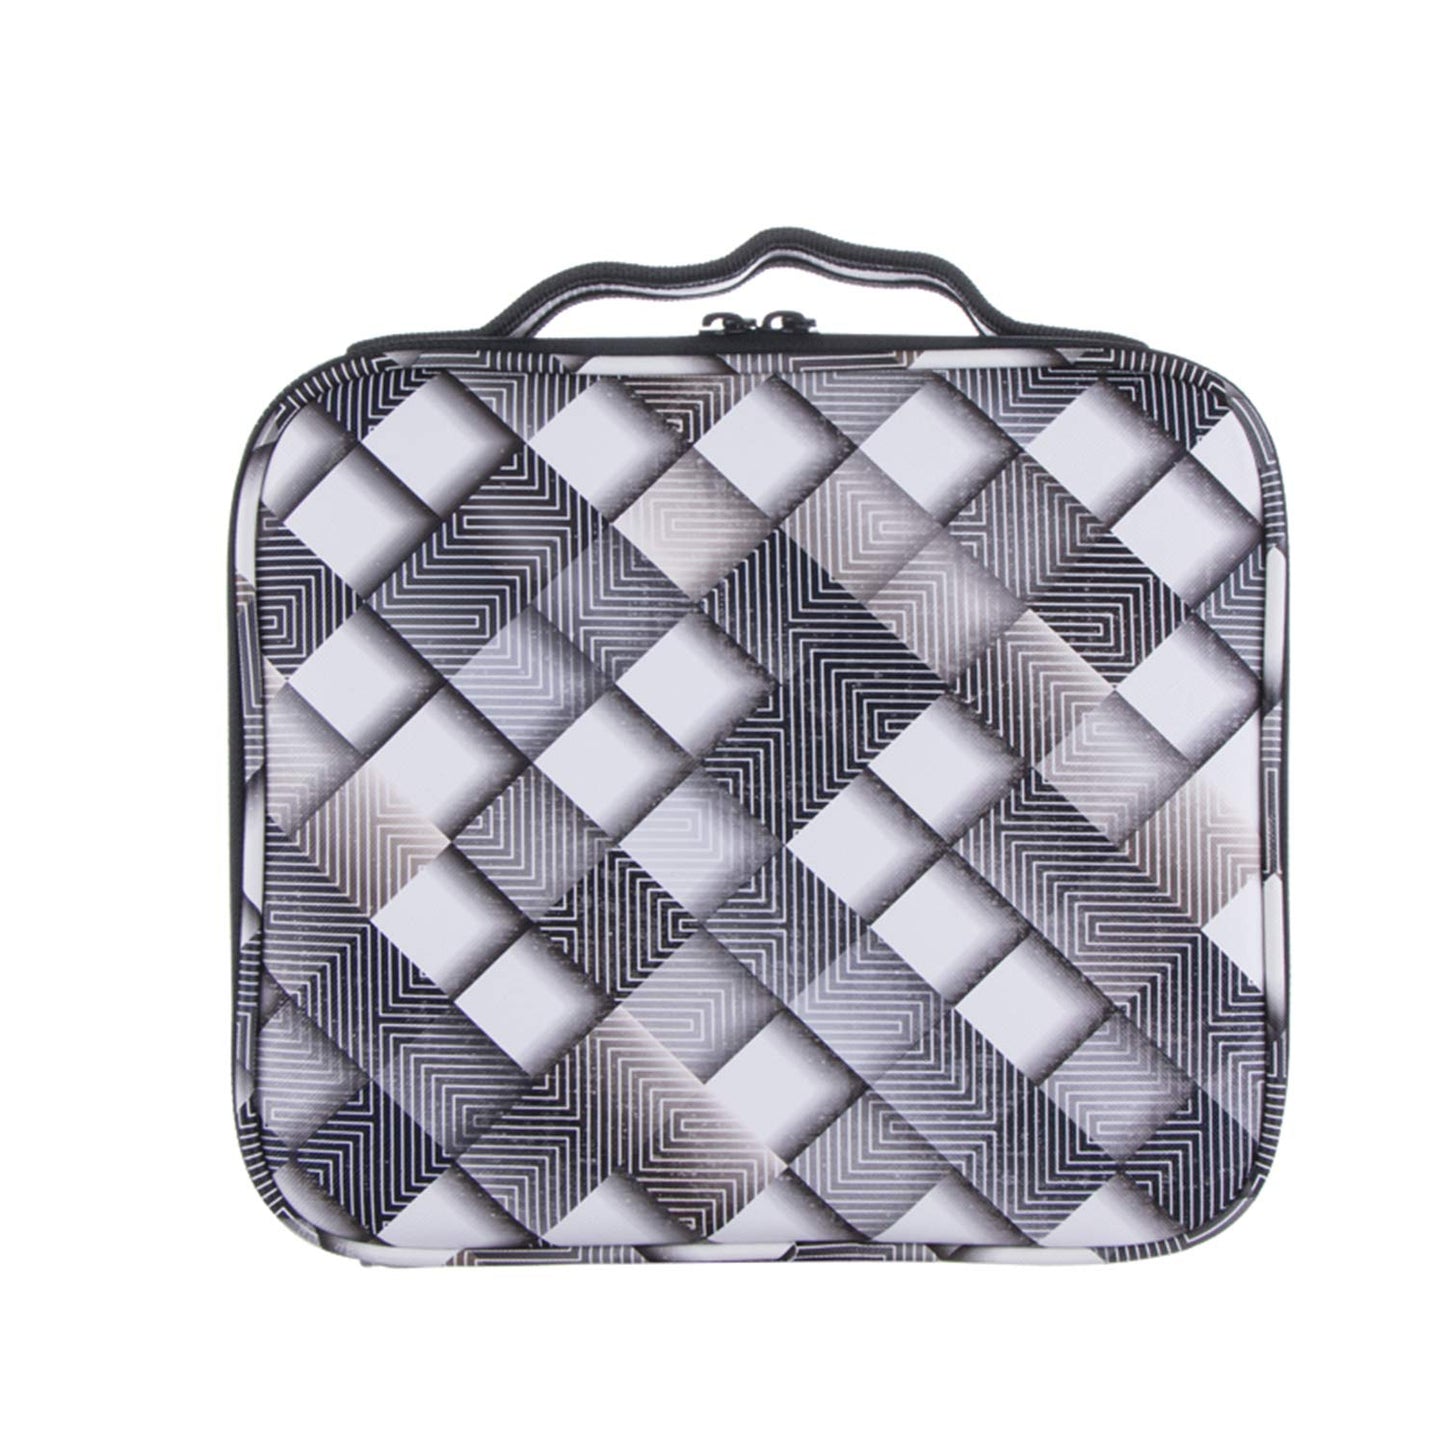 Cosmetic Storage Case with Adjustable Compartment (Grey Stripes)